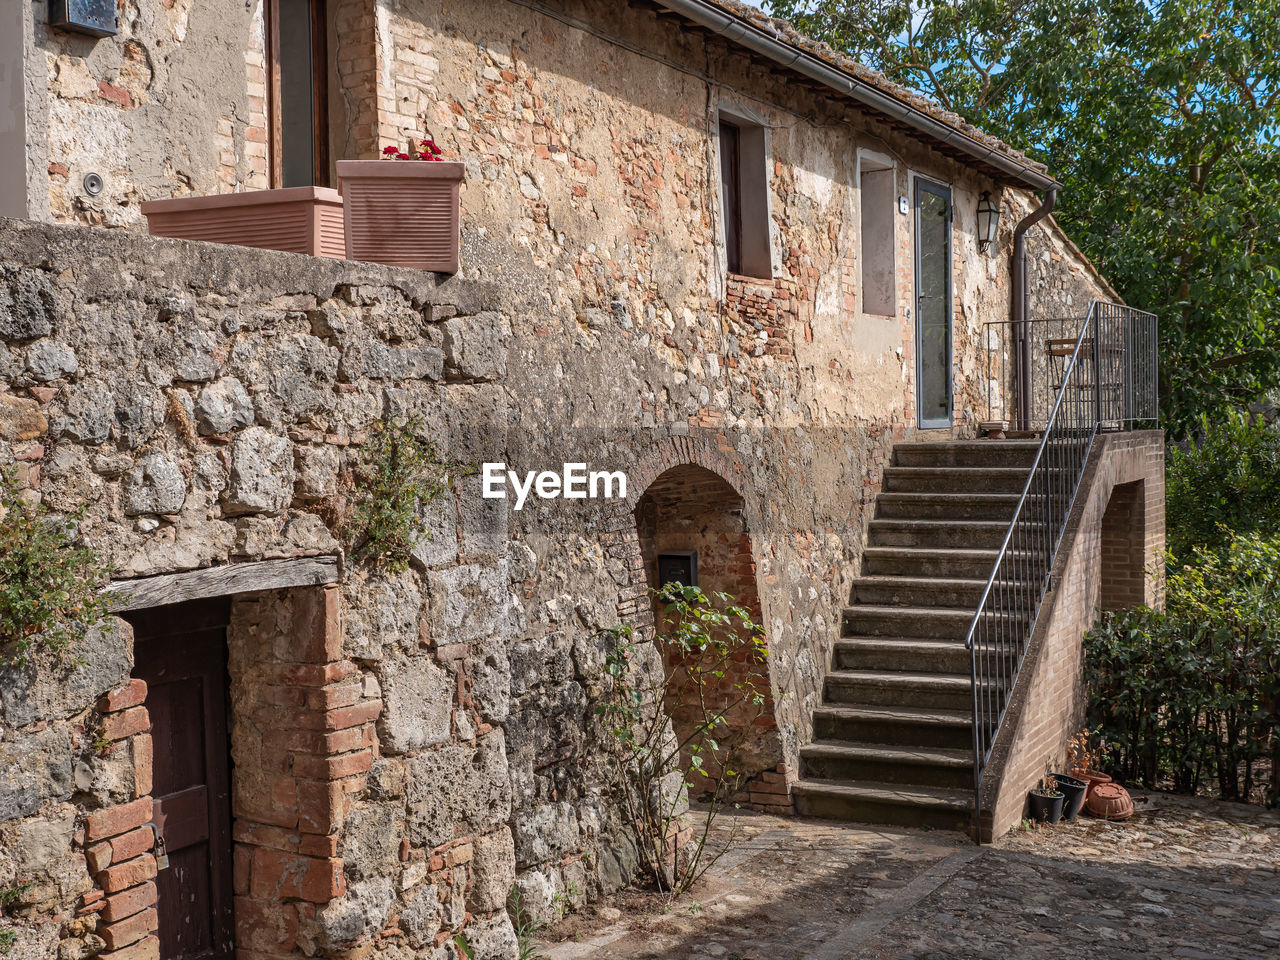 Ancient farmhouse and rural dwelling with outdoor stairs in monteriggioni, siena - italy.